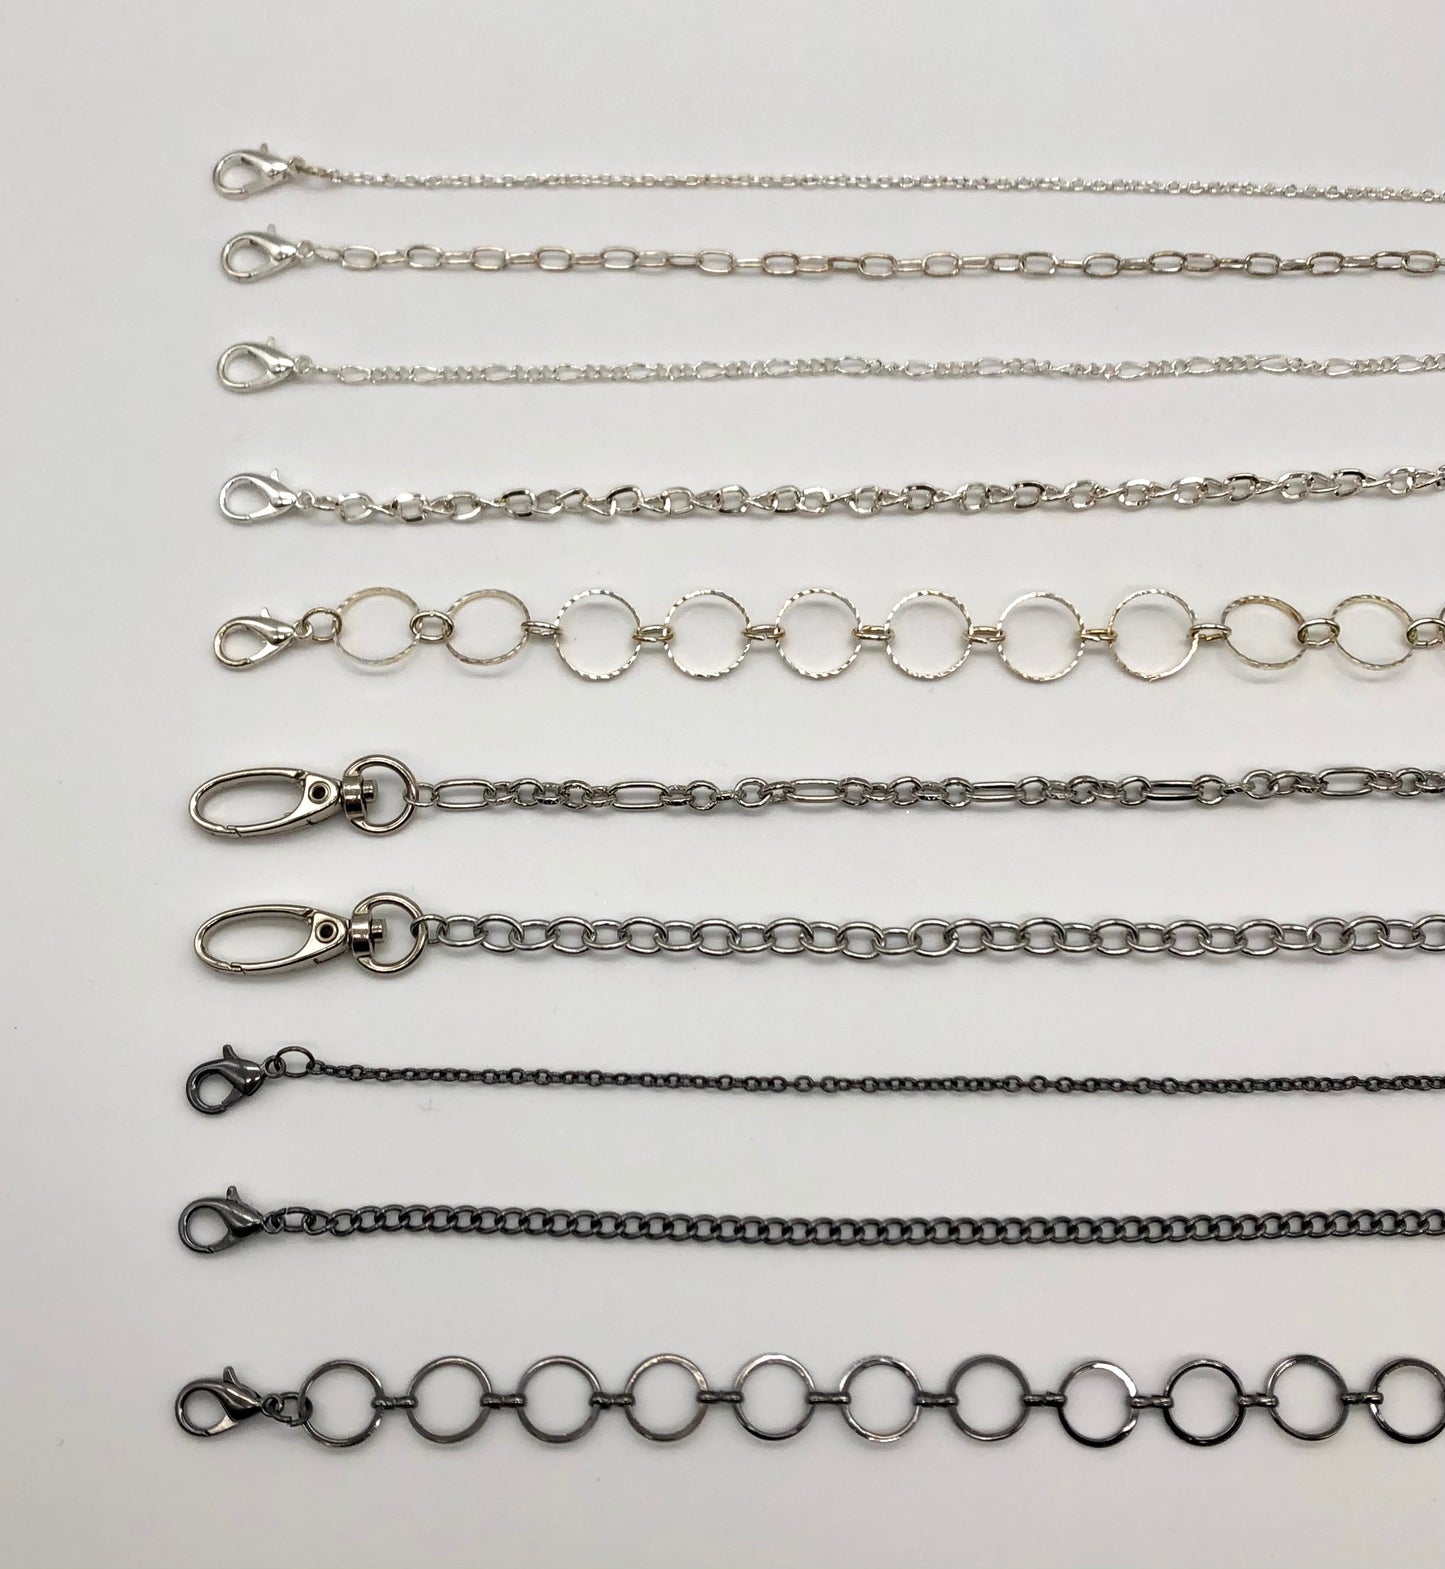 Silver face mask or eyeglass chain, lanyard, necklace